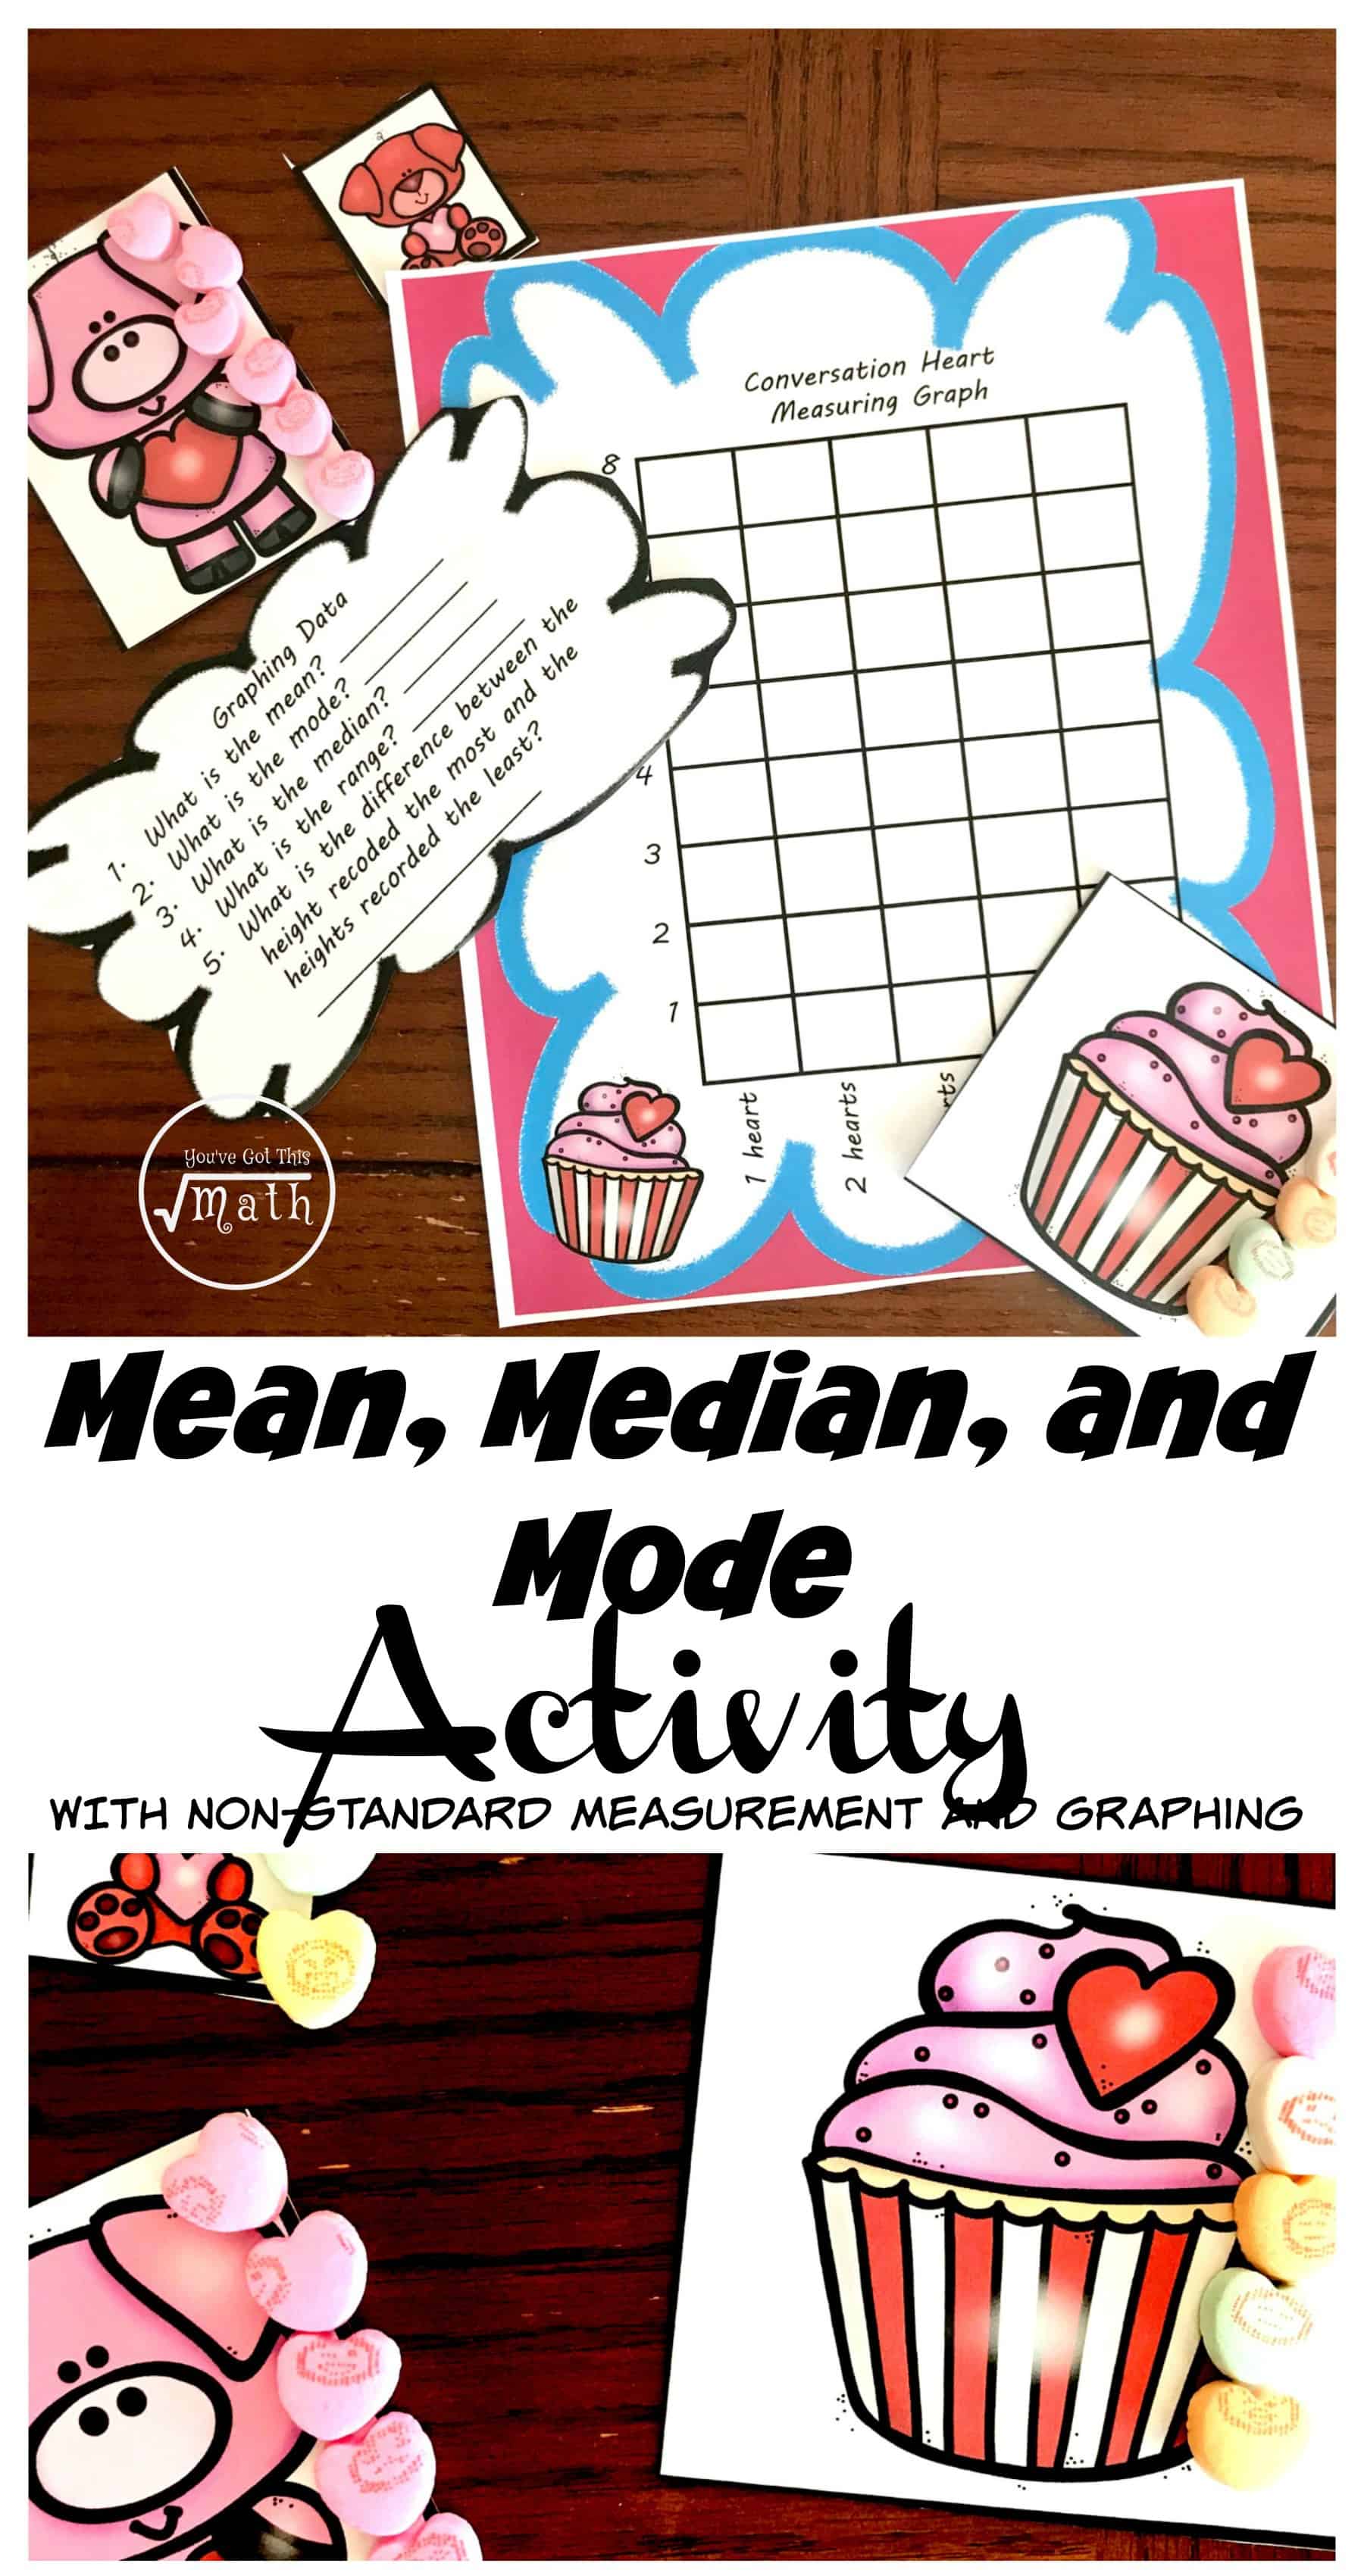 Find the Mean, Median, and Mode with this Fun, Hands-on Activity